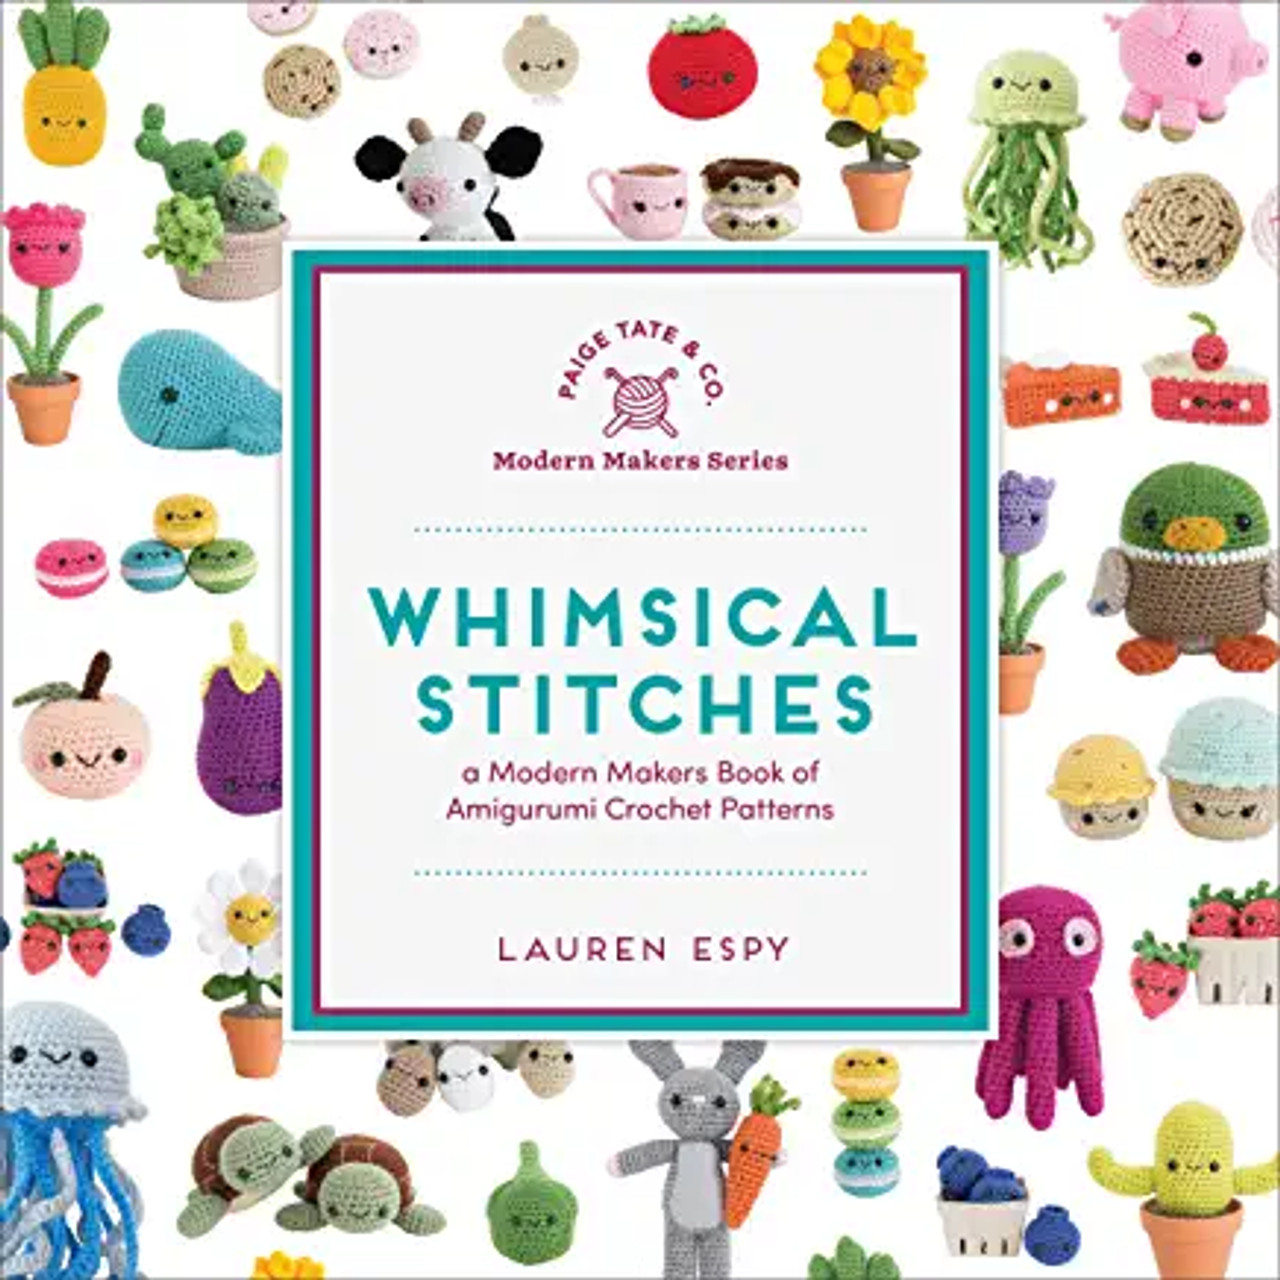 Crochet Book-Look 📖👀 Whimsical Stitches by Lauren Espy 